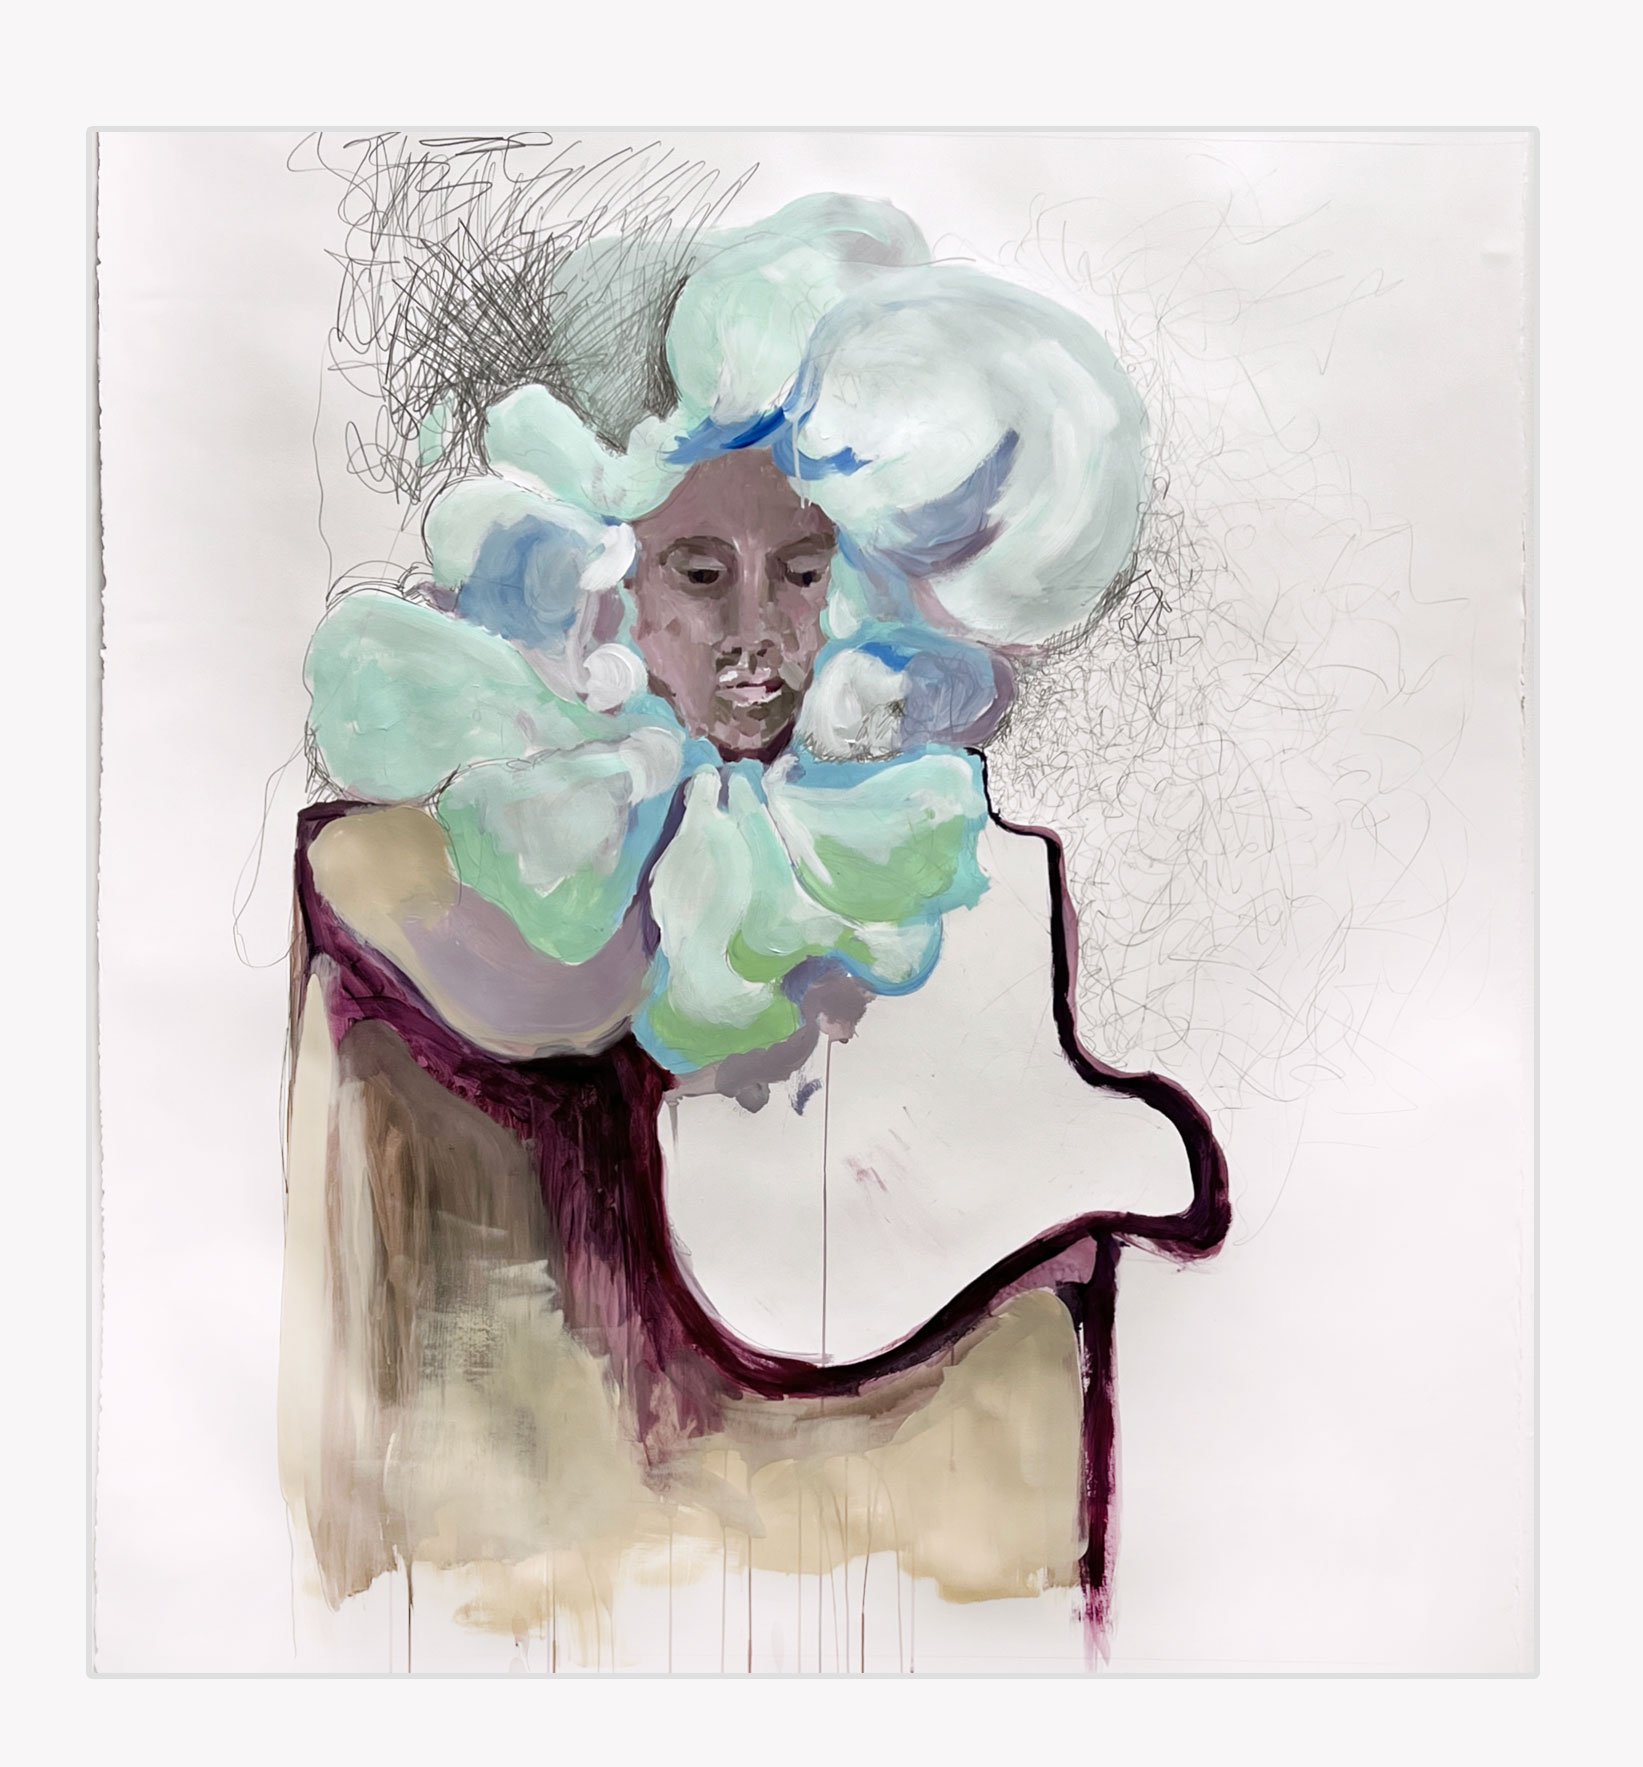   Flower Head , Kristi Head 2022. Acrylic and graphite on paper, 65 x 66 inches. 